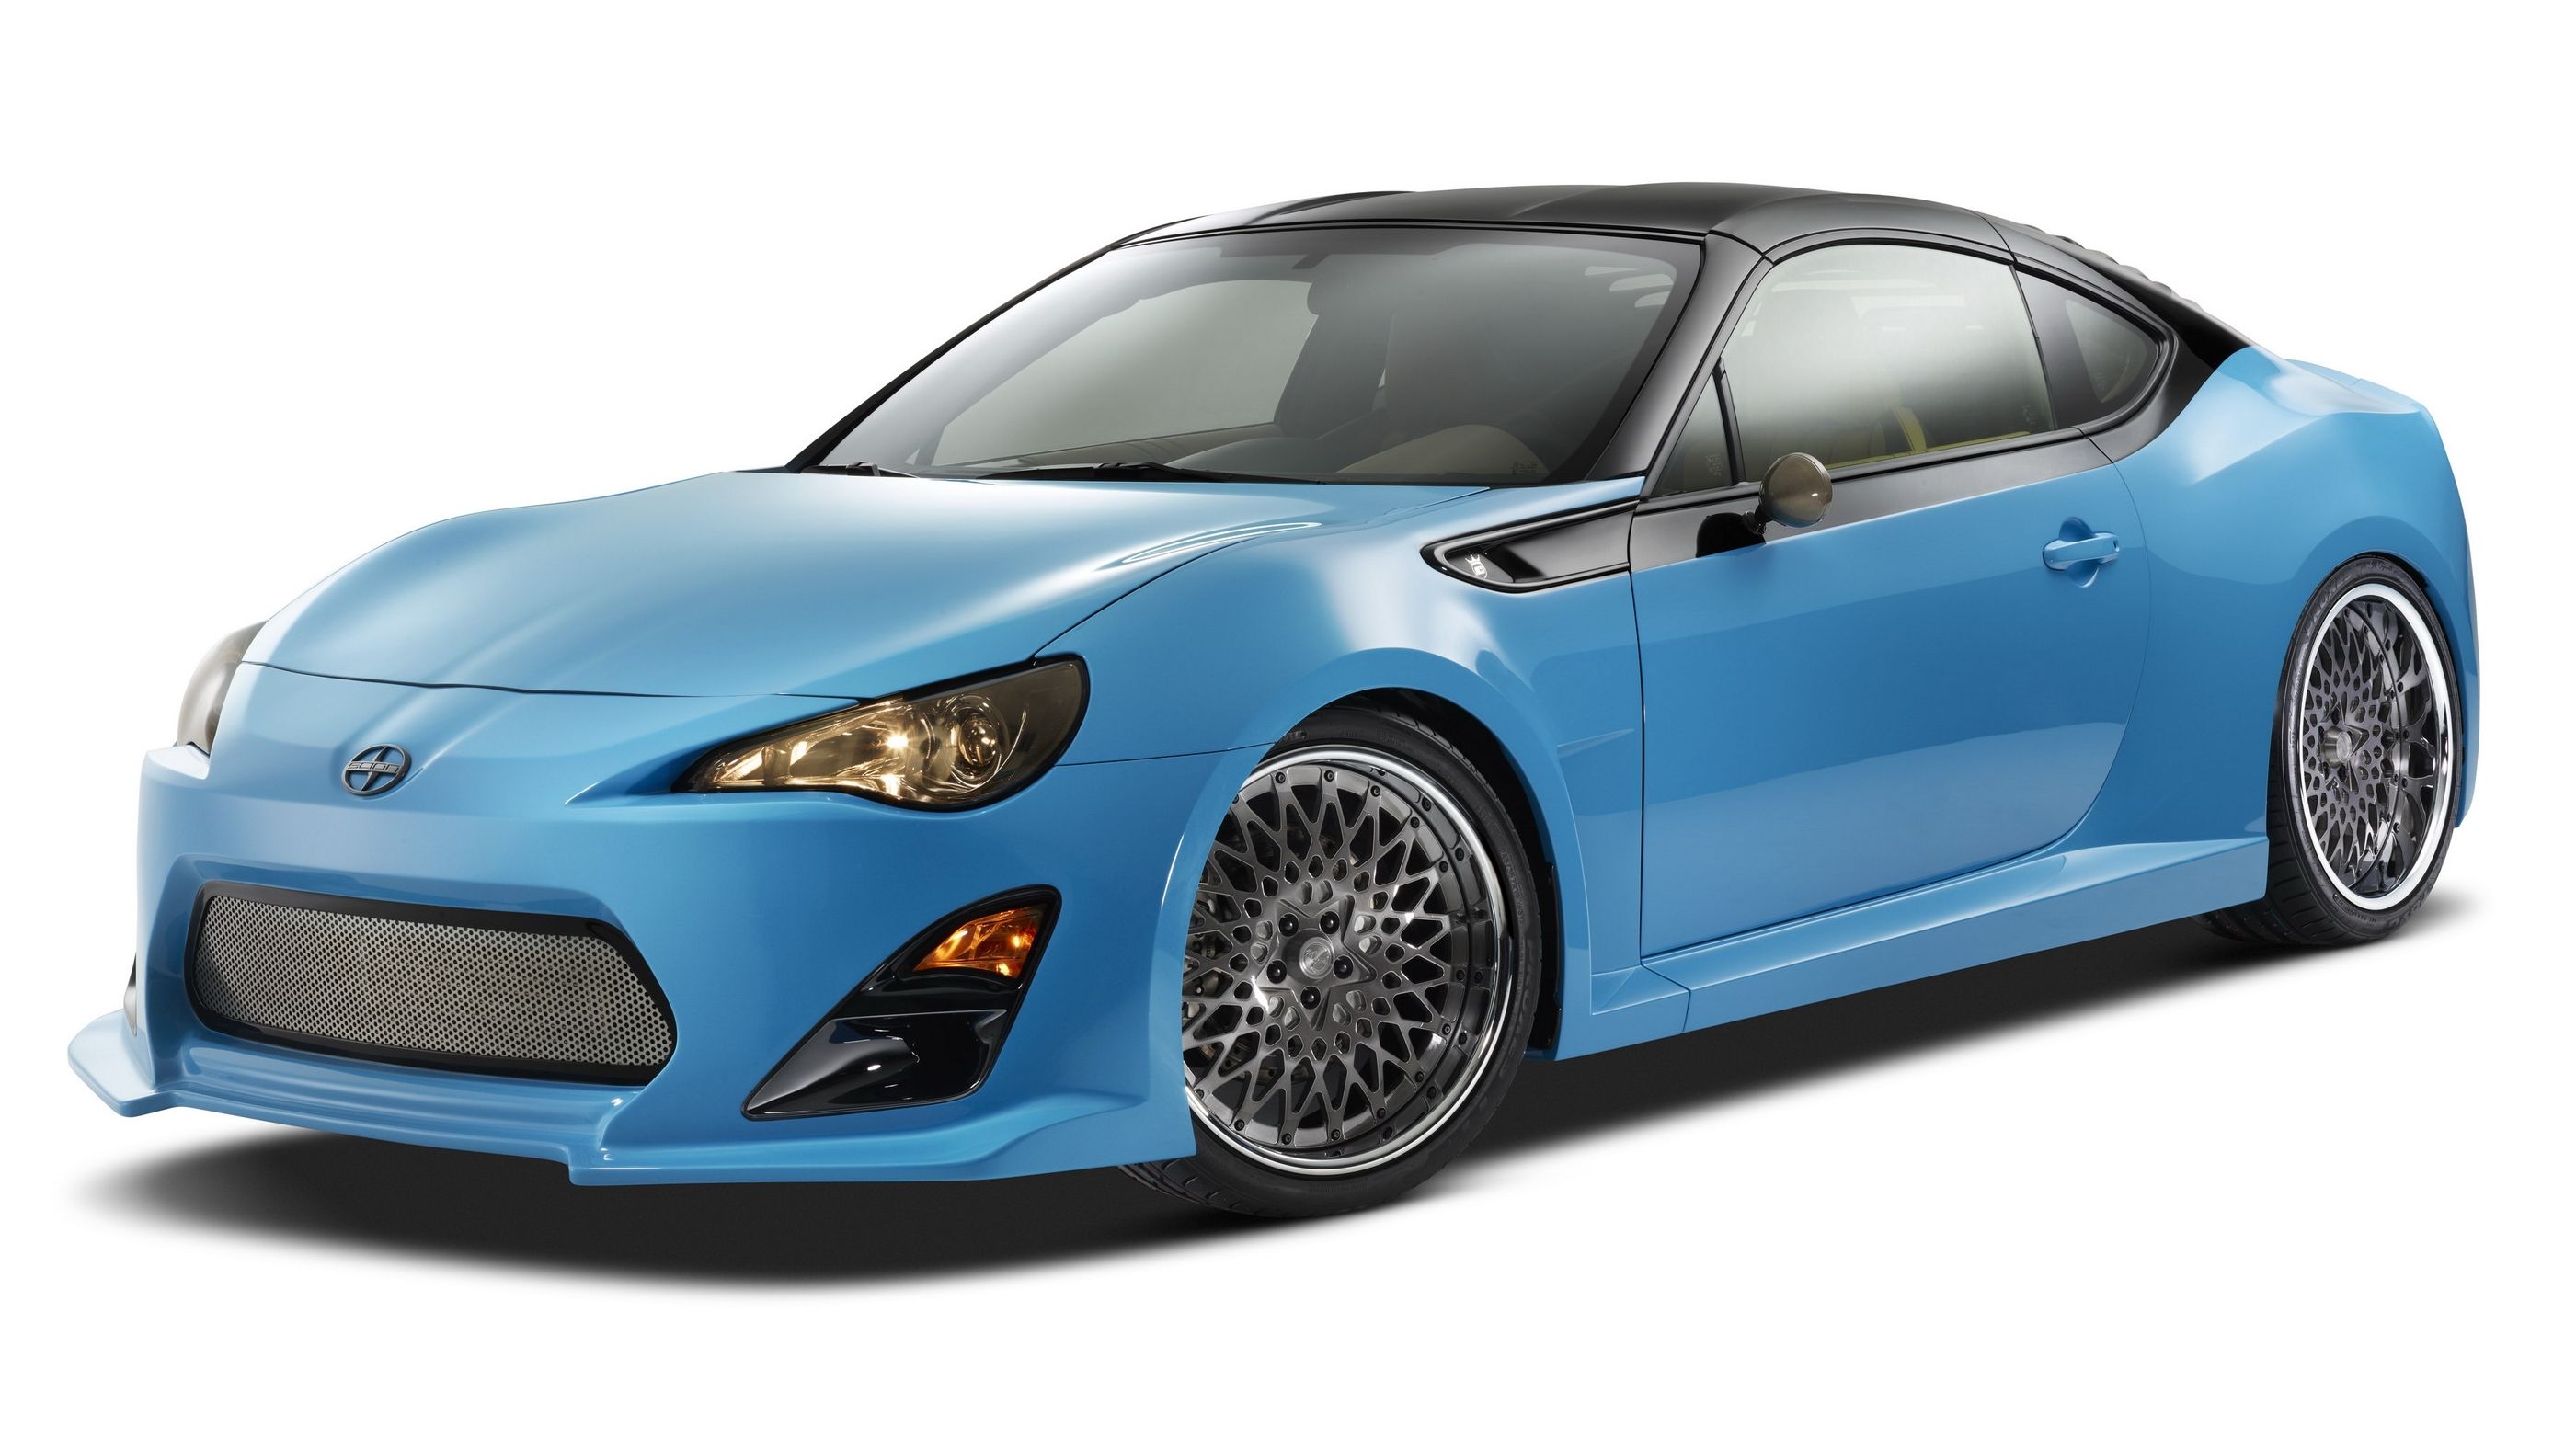  Finally!!! A turbocharged FR-S... Too bad it's just a SEMA concept. But that targa roof is pretty dang cool. 